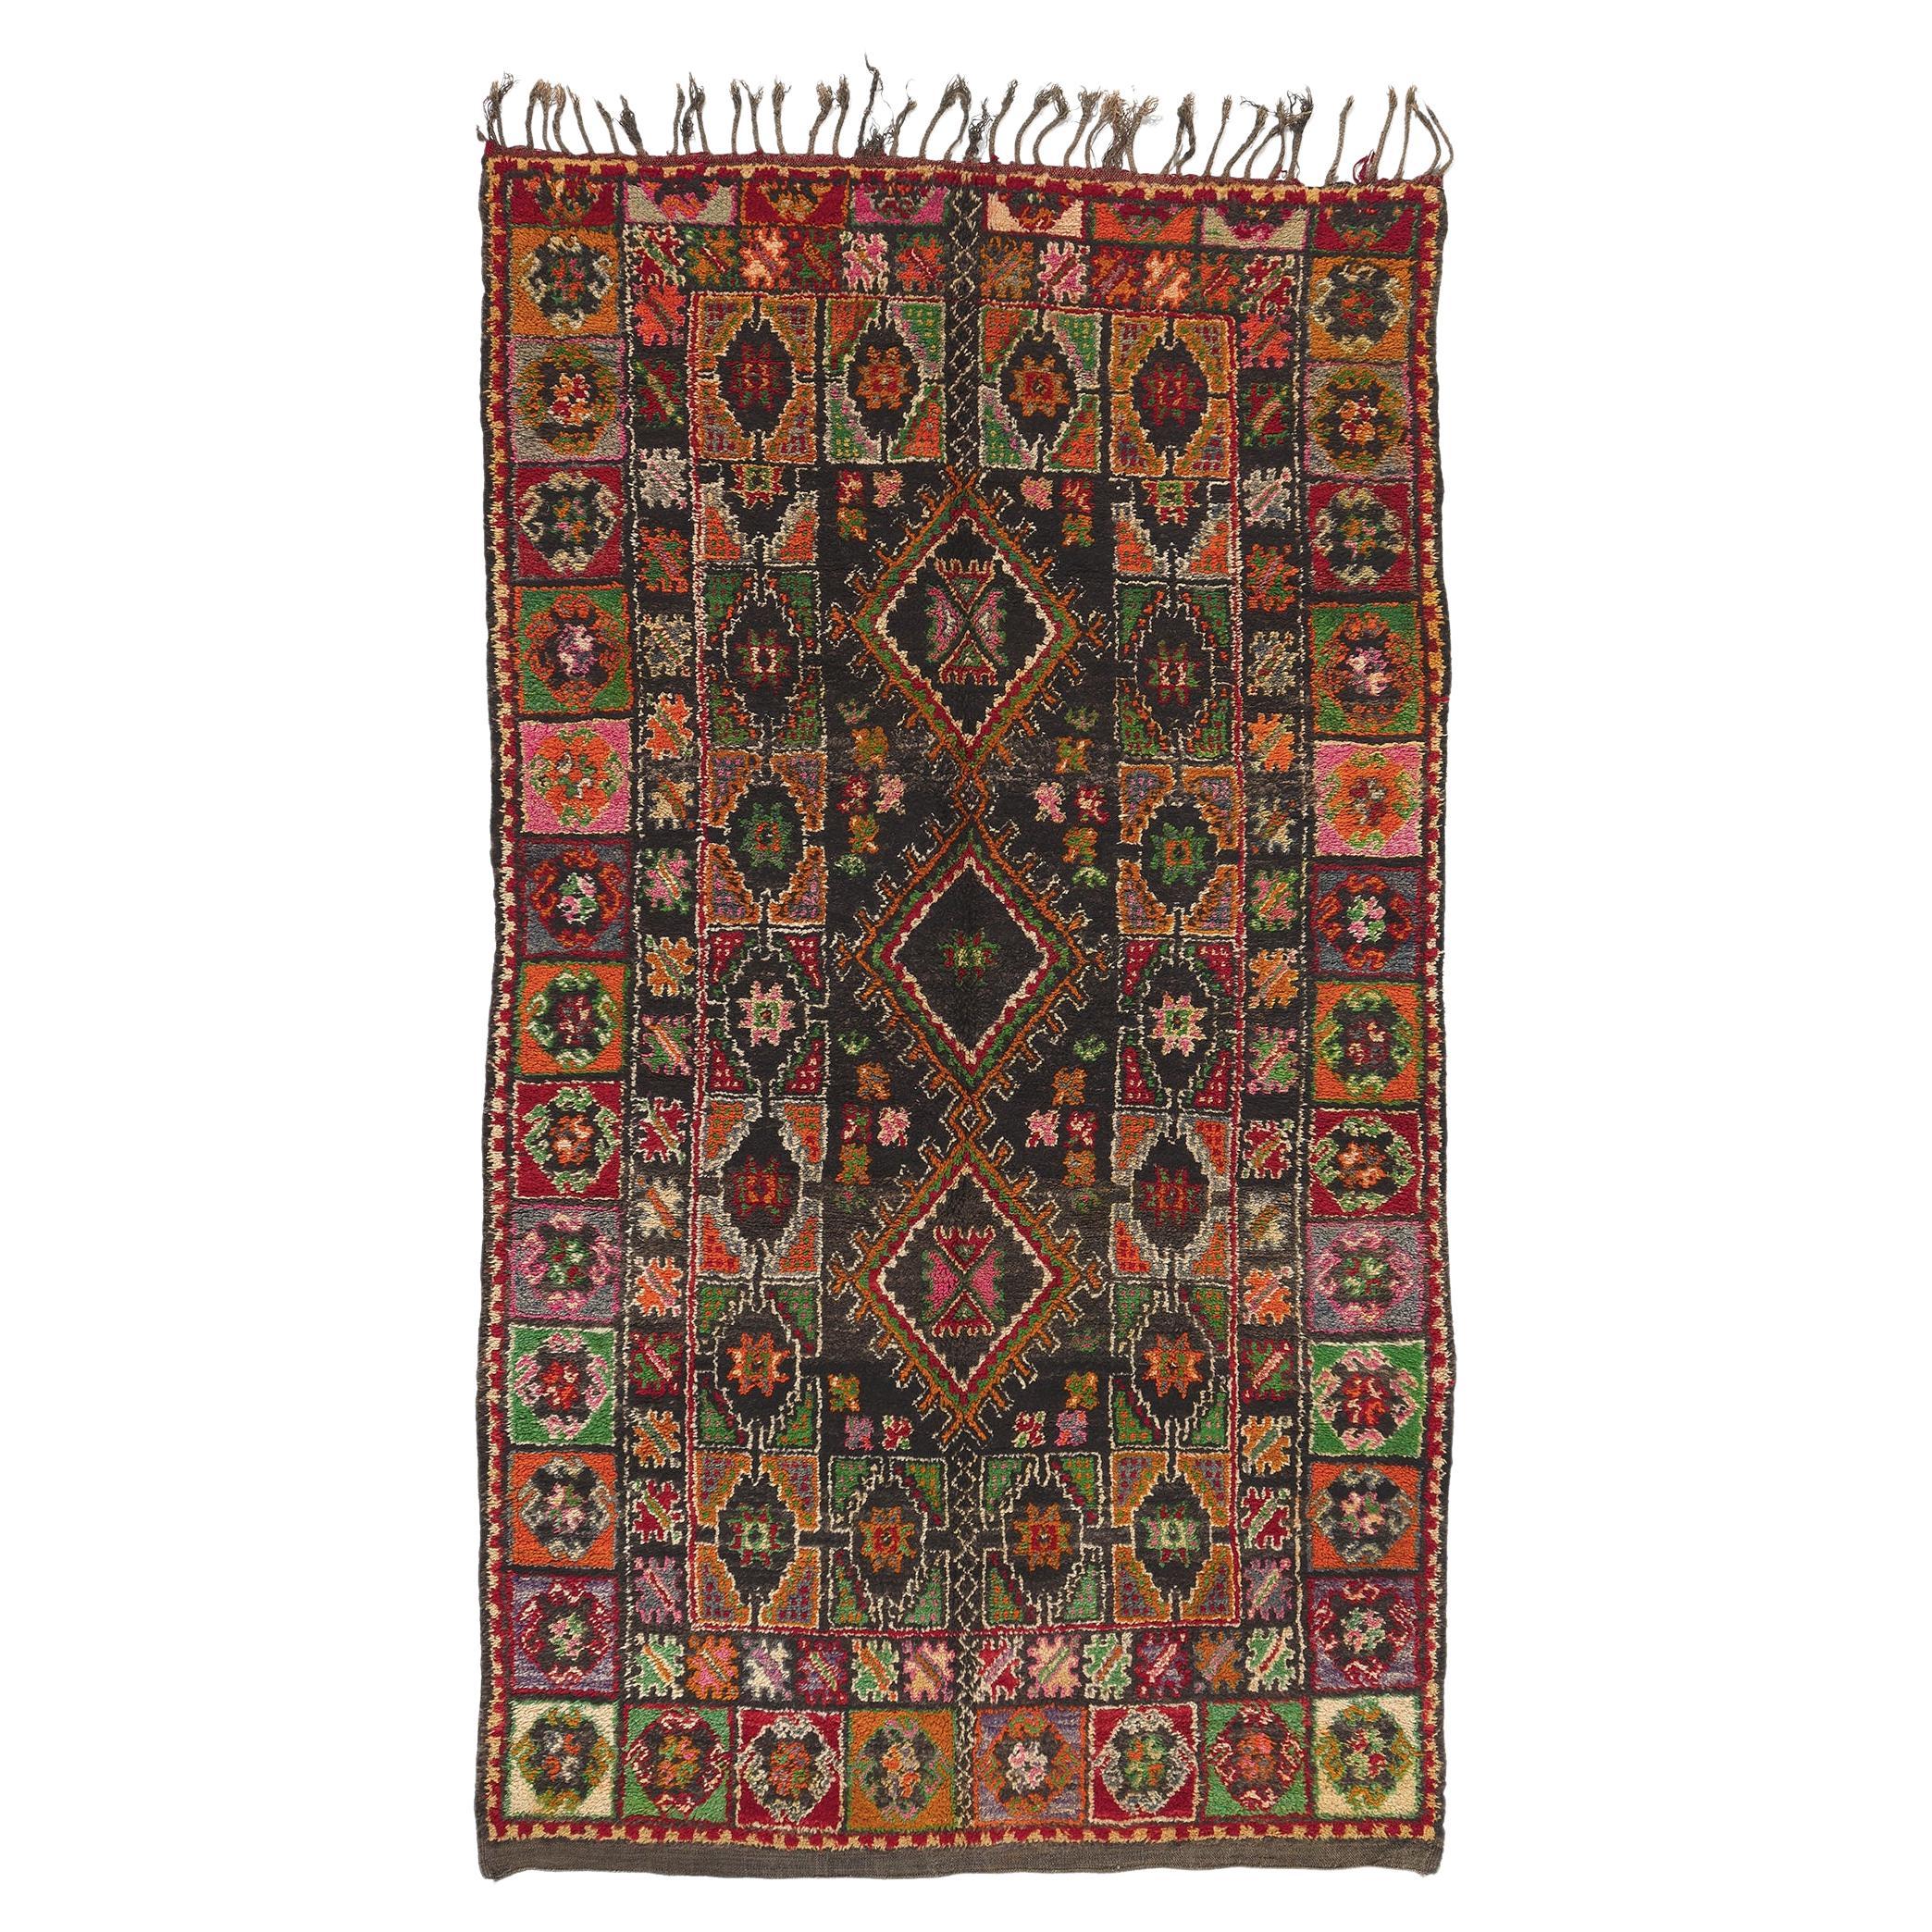 Vintage Boujad Moroccan Rug, Eclectic Jungalow Meets Colorful Boho For Sale